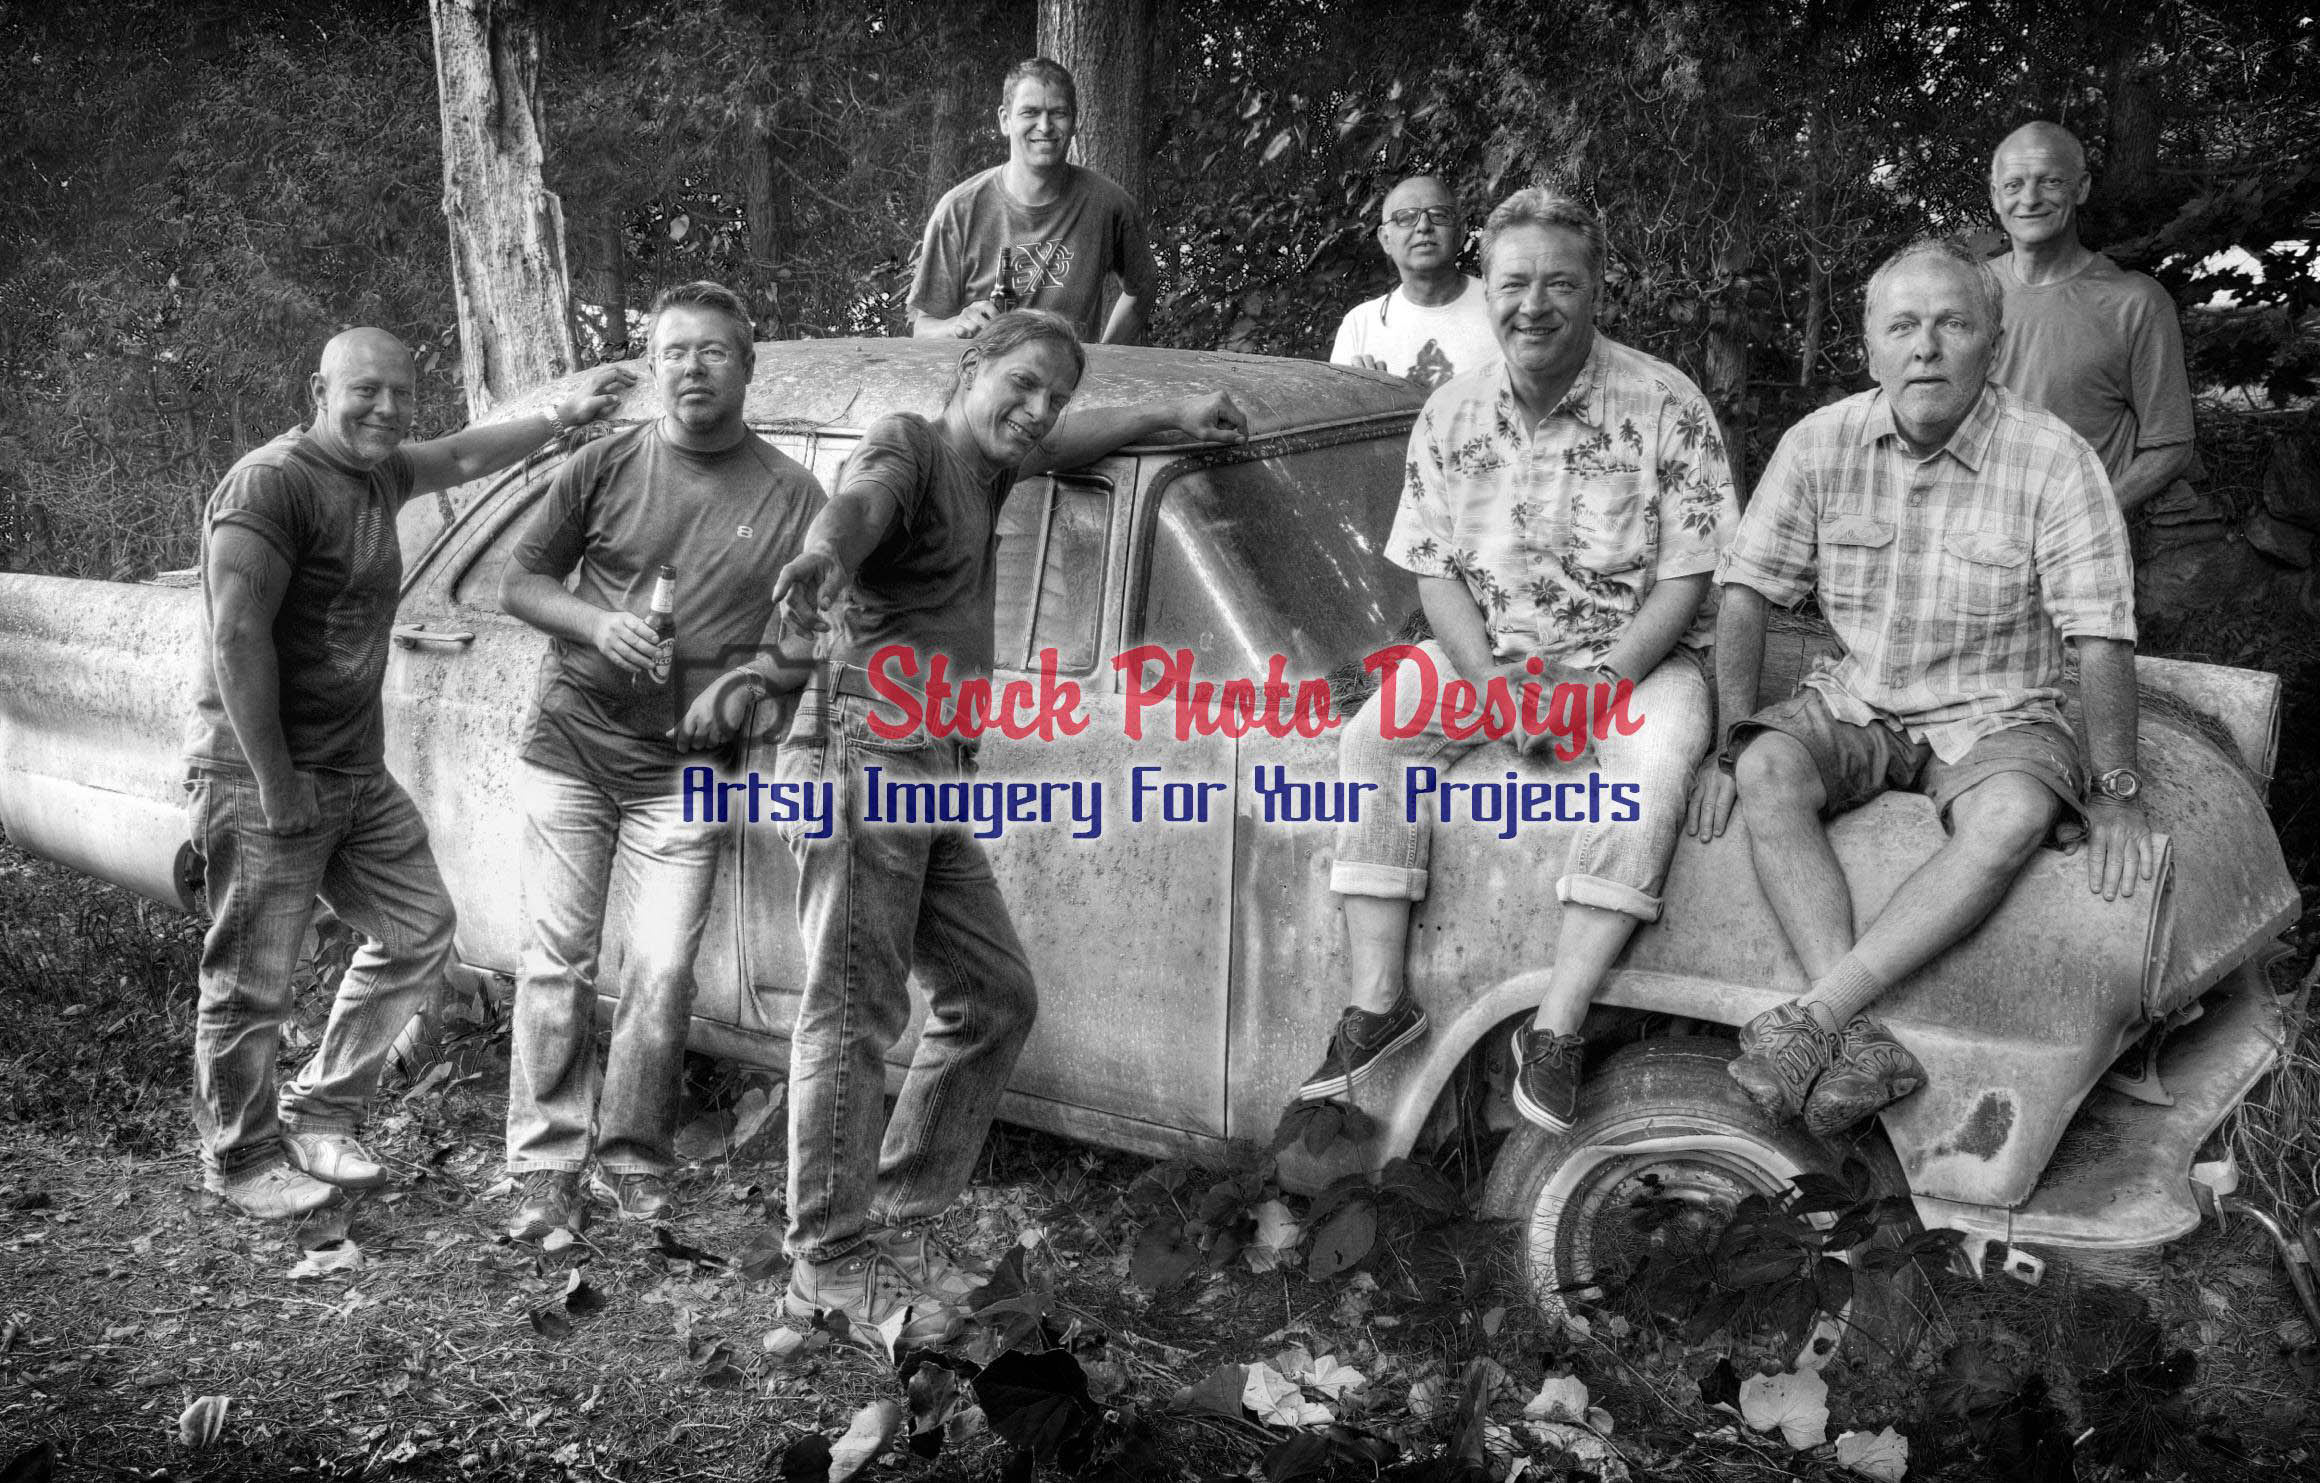 Group of Friends on an old Car 4 – Dimensions: 2320 by 1483 pixels